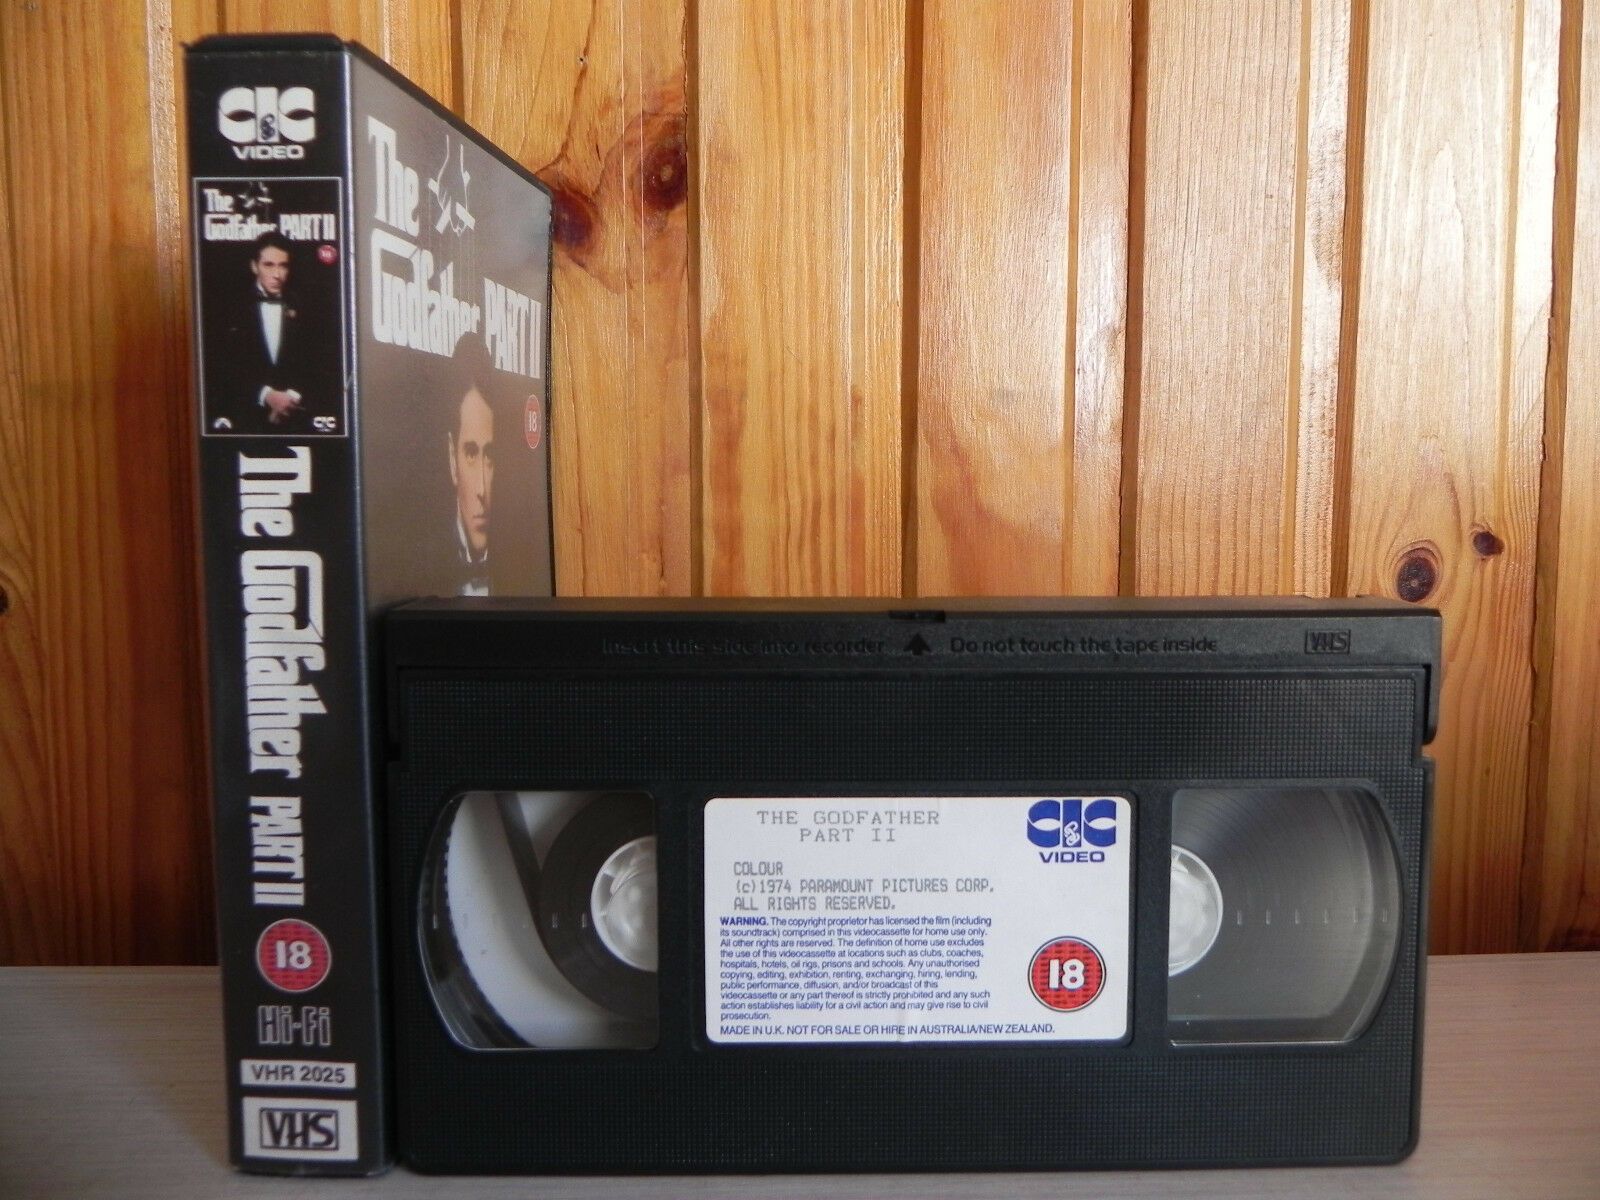 The Godfather Part 2 - CIC Release - Classic Crime - Drama Video - Al Pacino VHS-